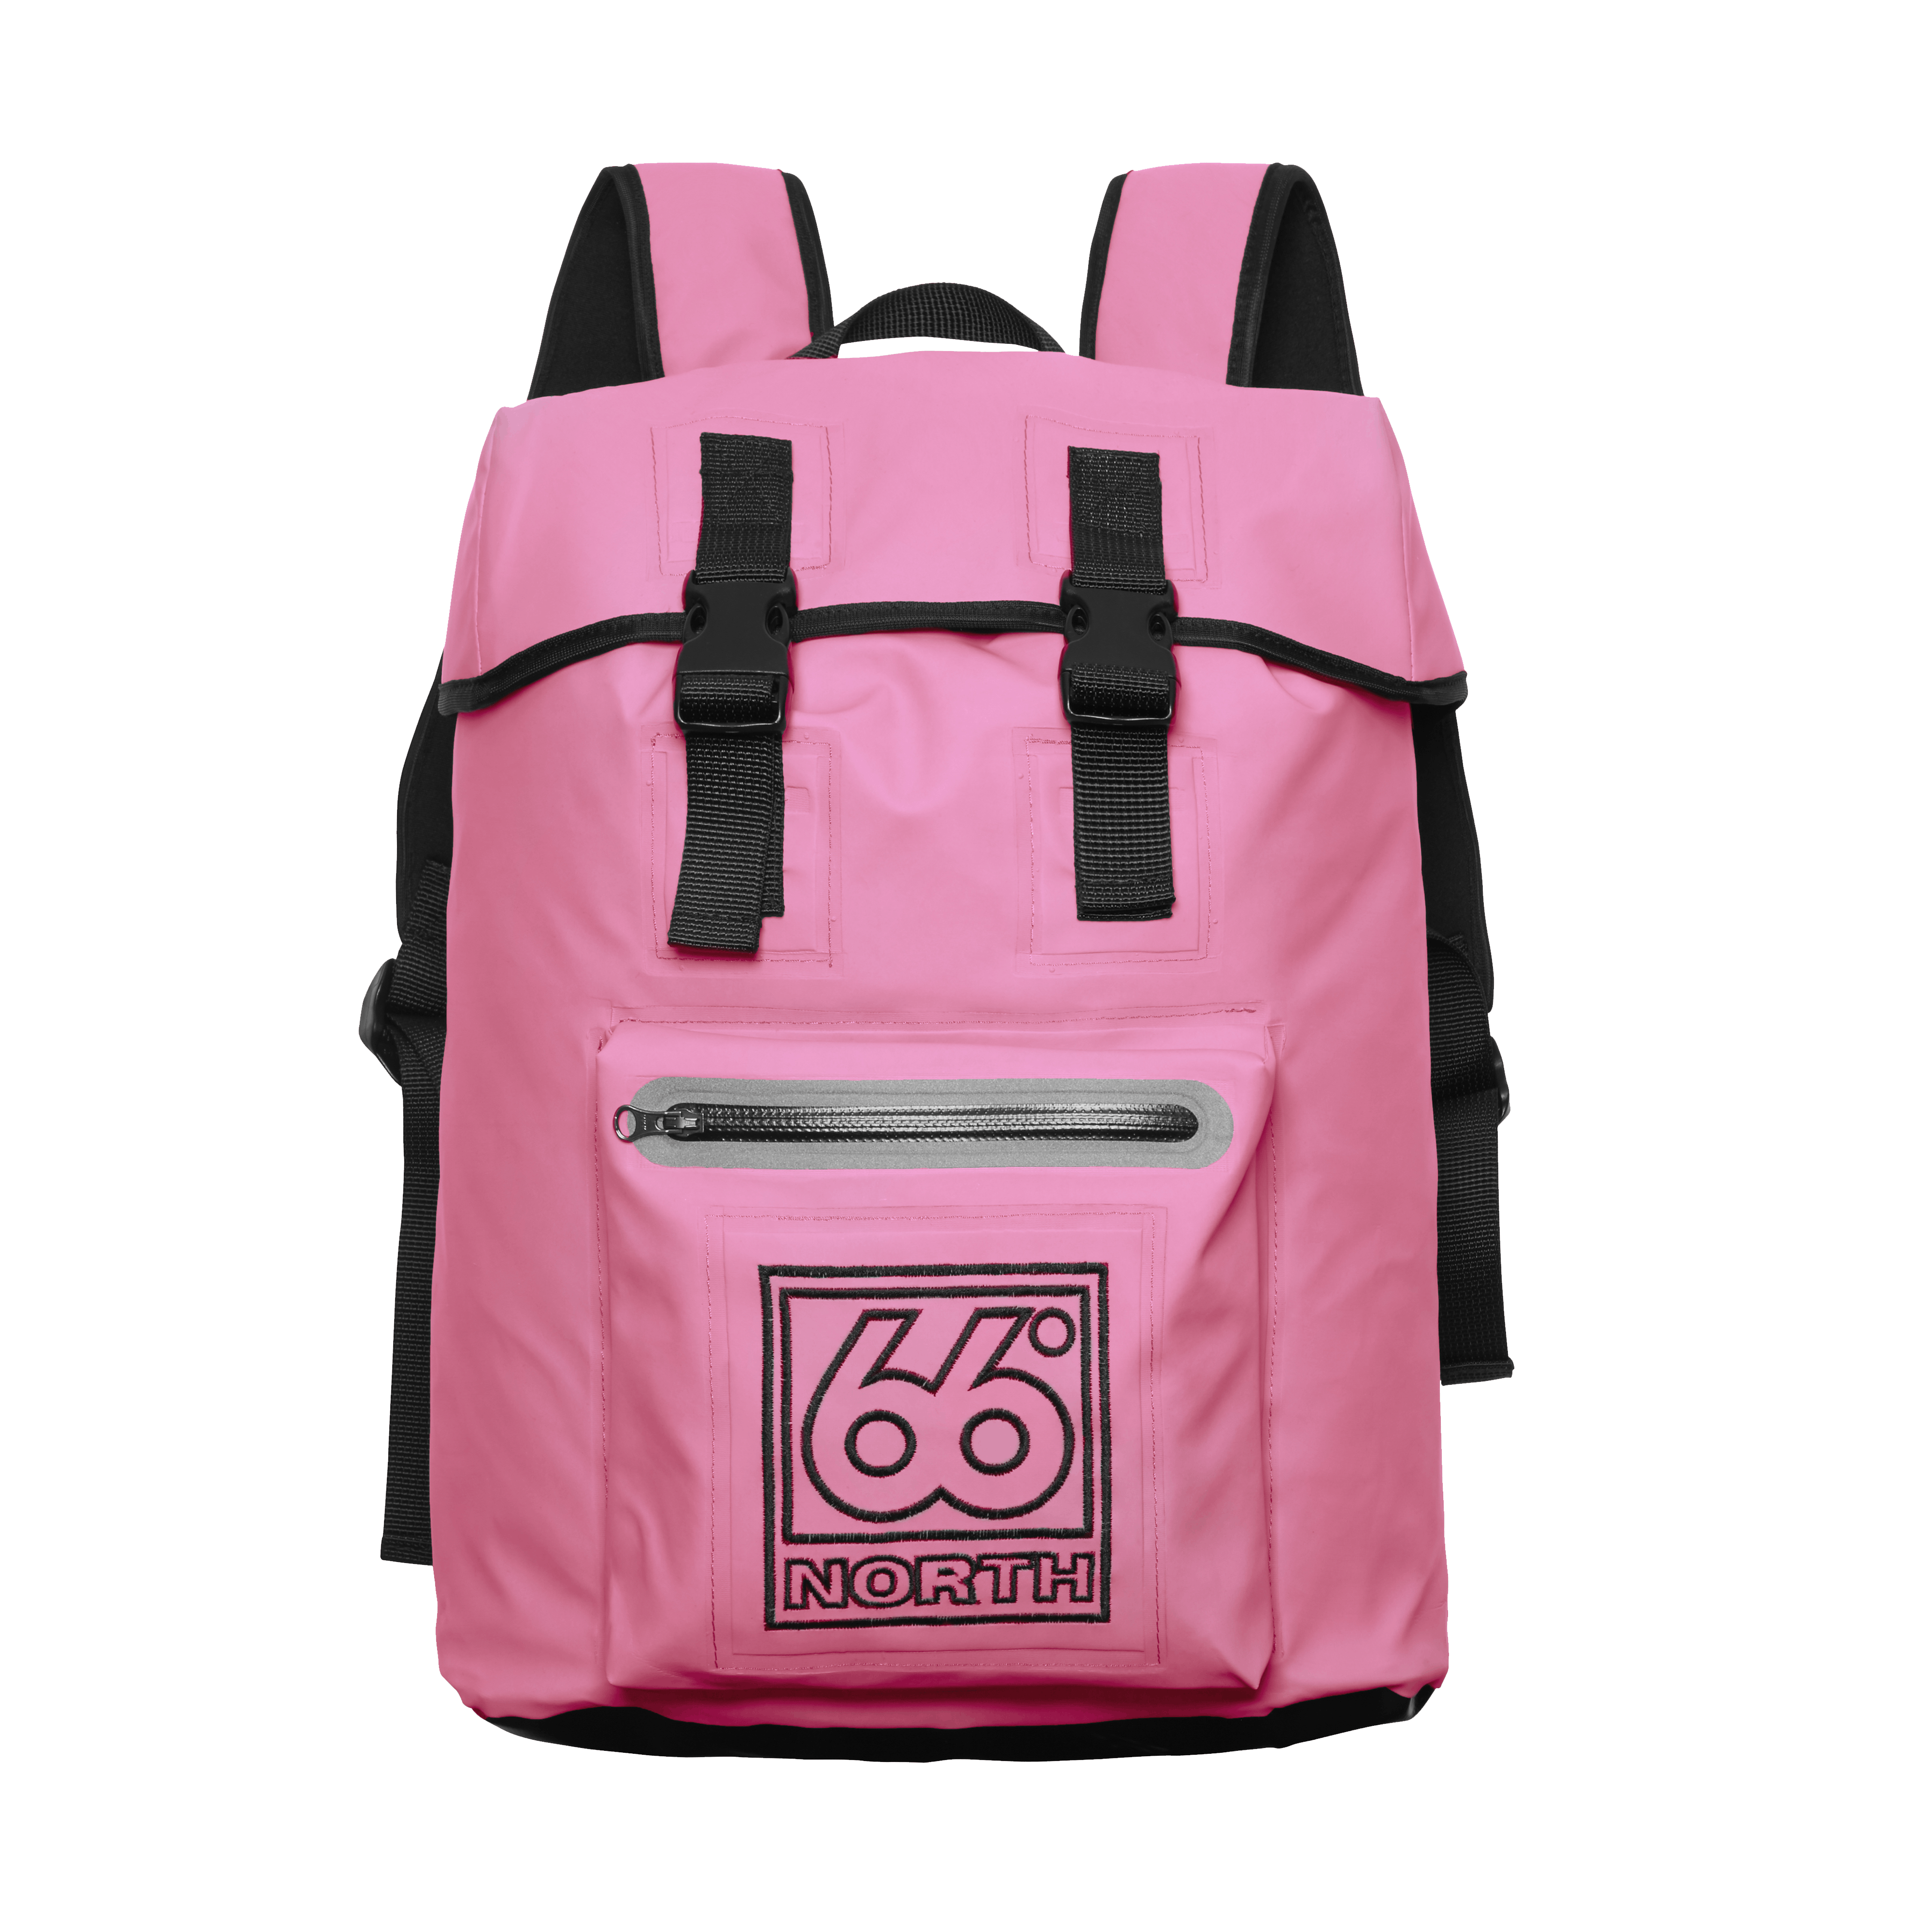 66 North Womens Backpack Accessories - Pink - One Size